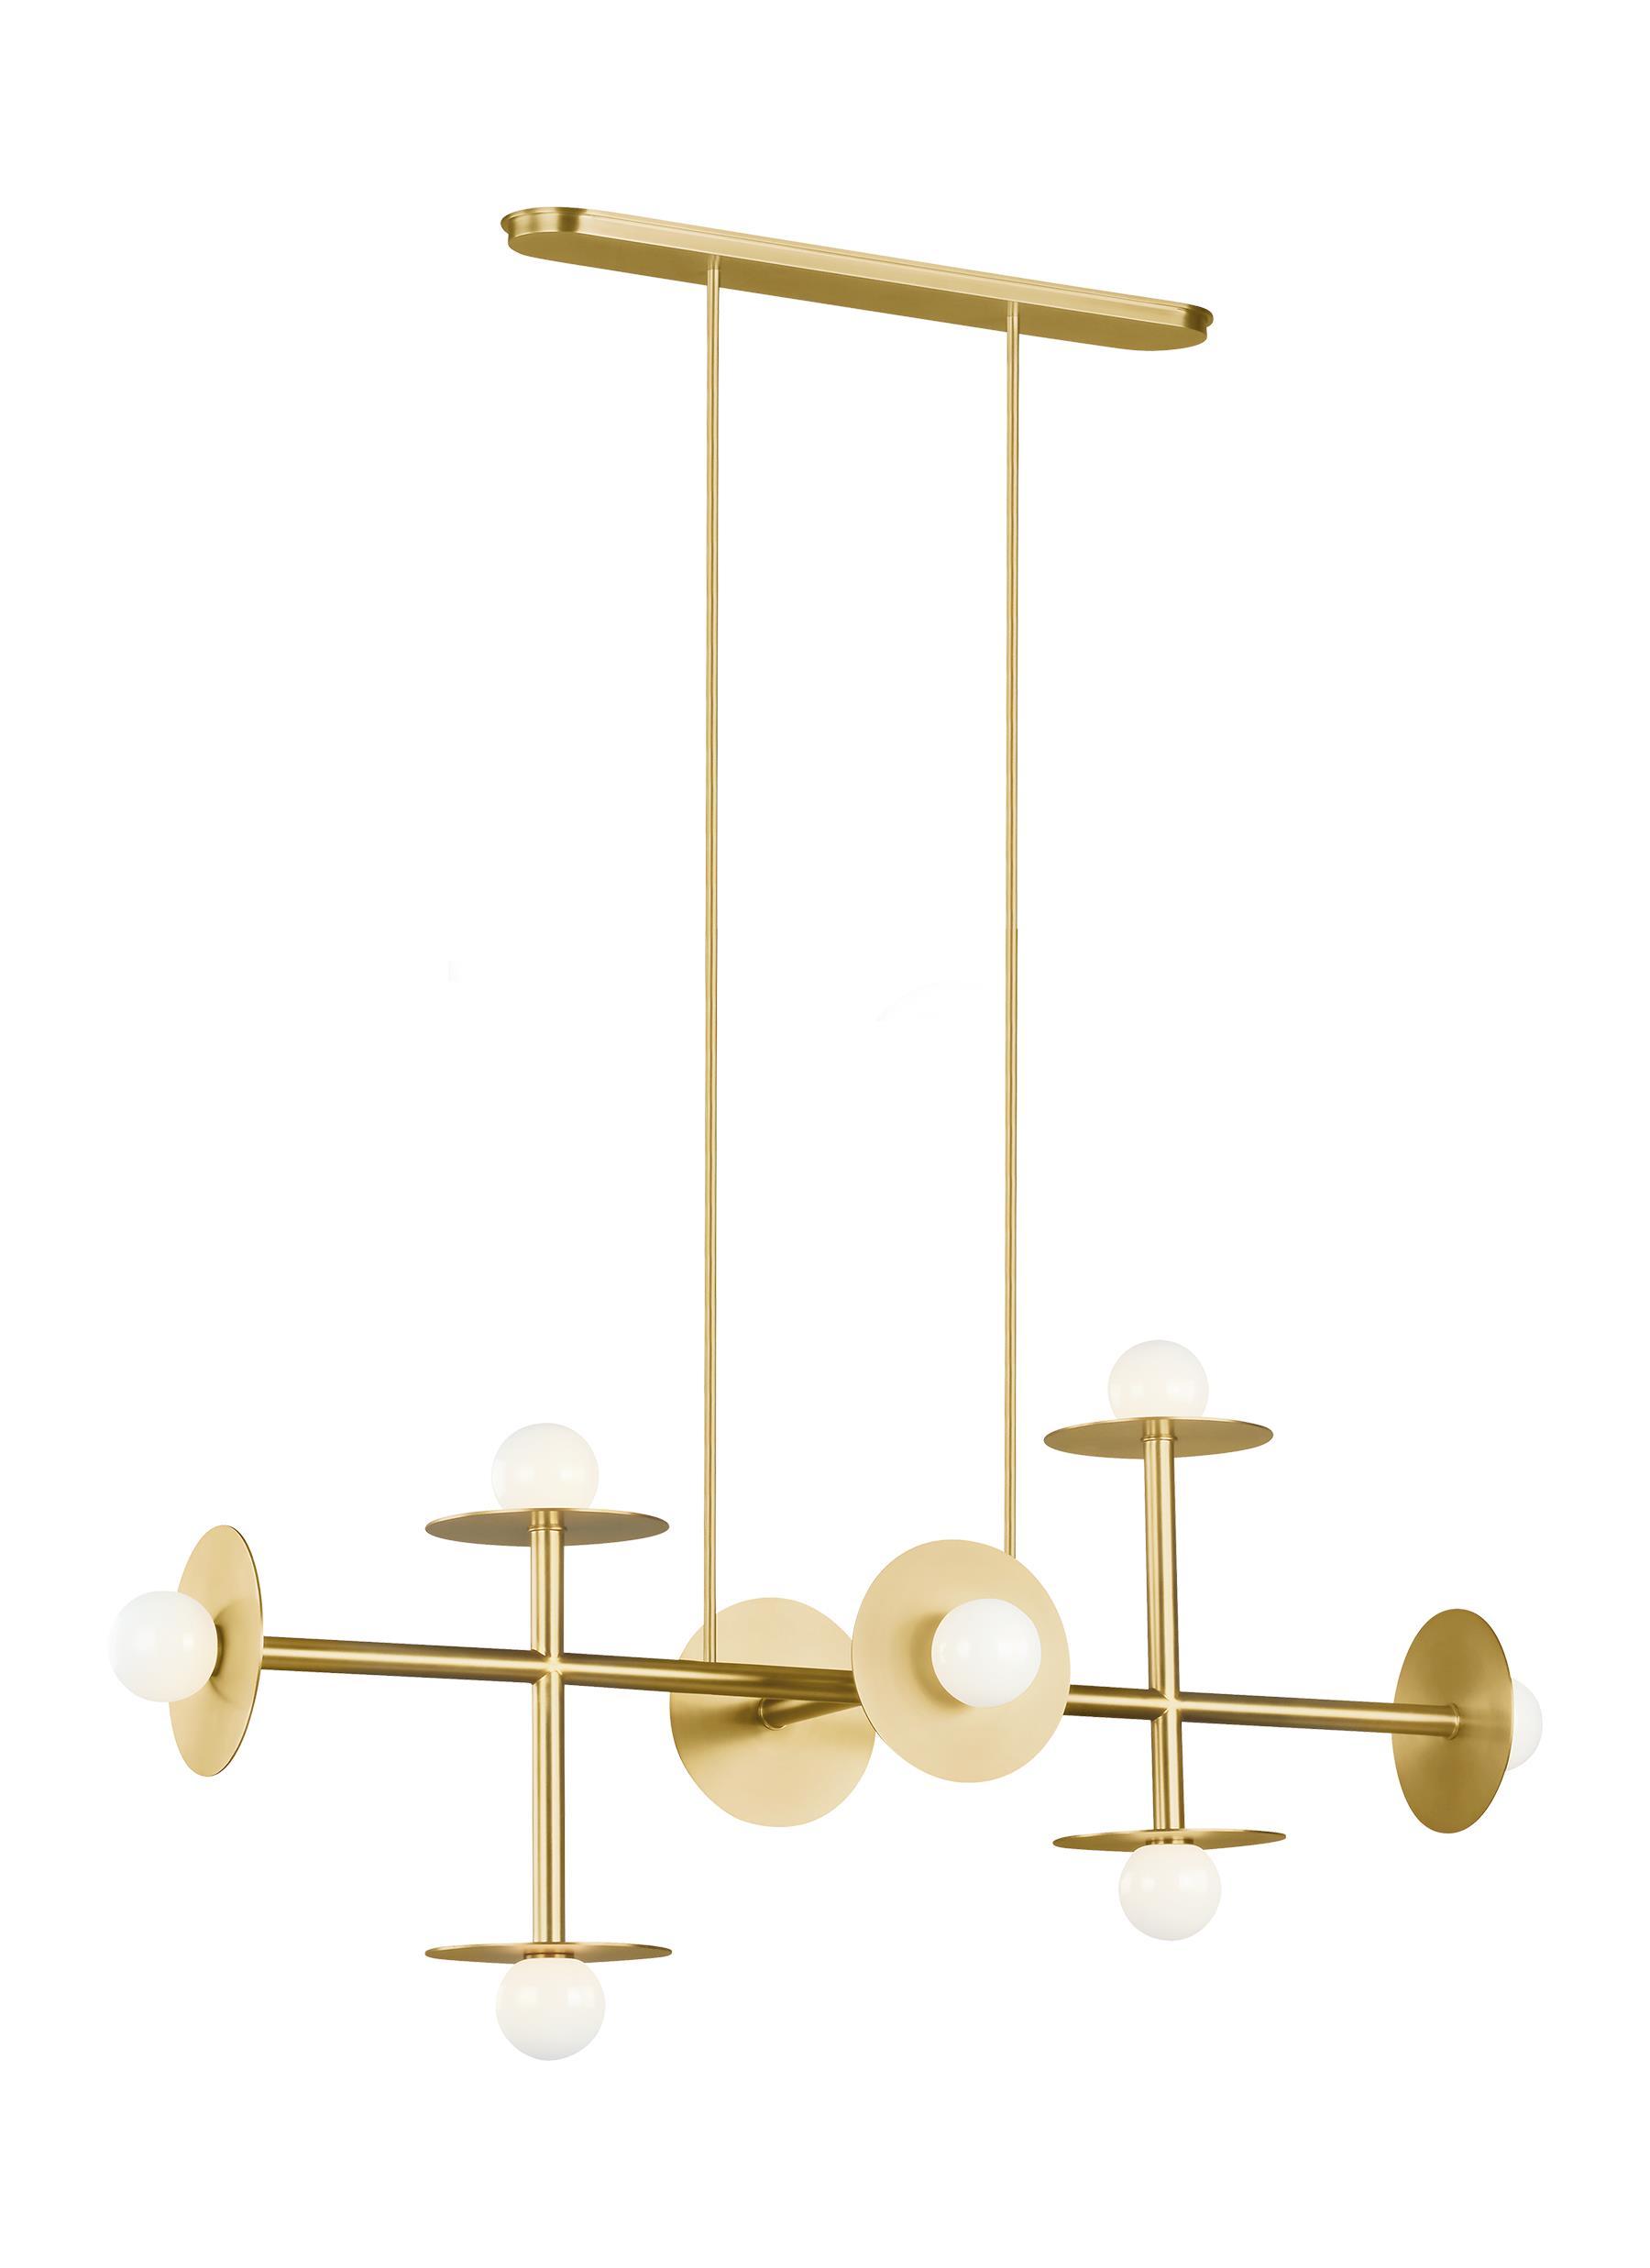 Nodes Burnished Brass 8-Light Linear Chandelier Ceiling Feiss 